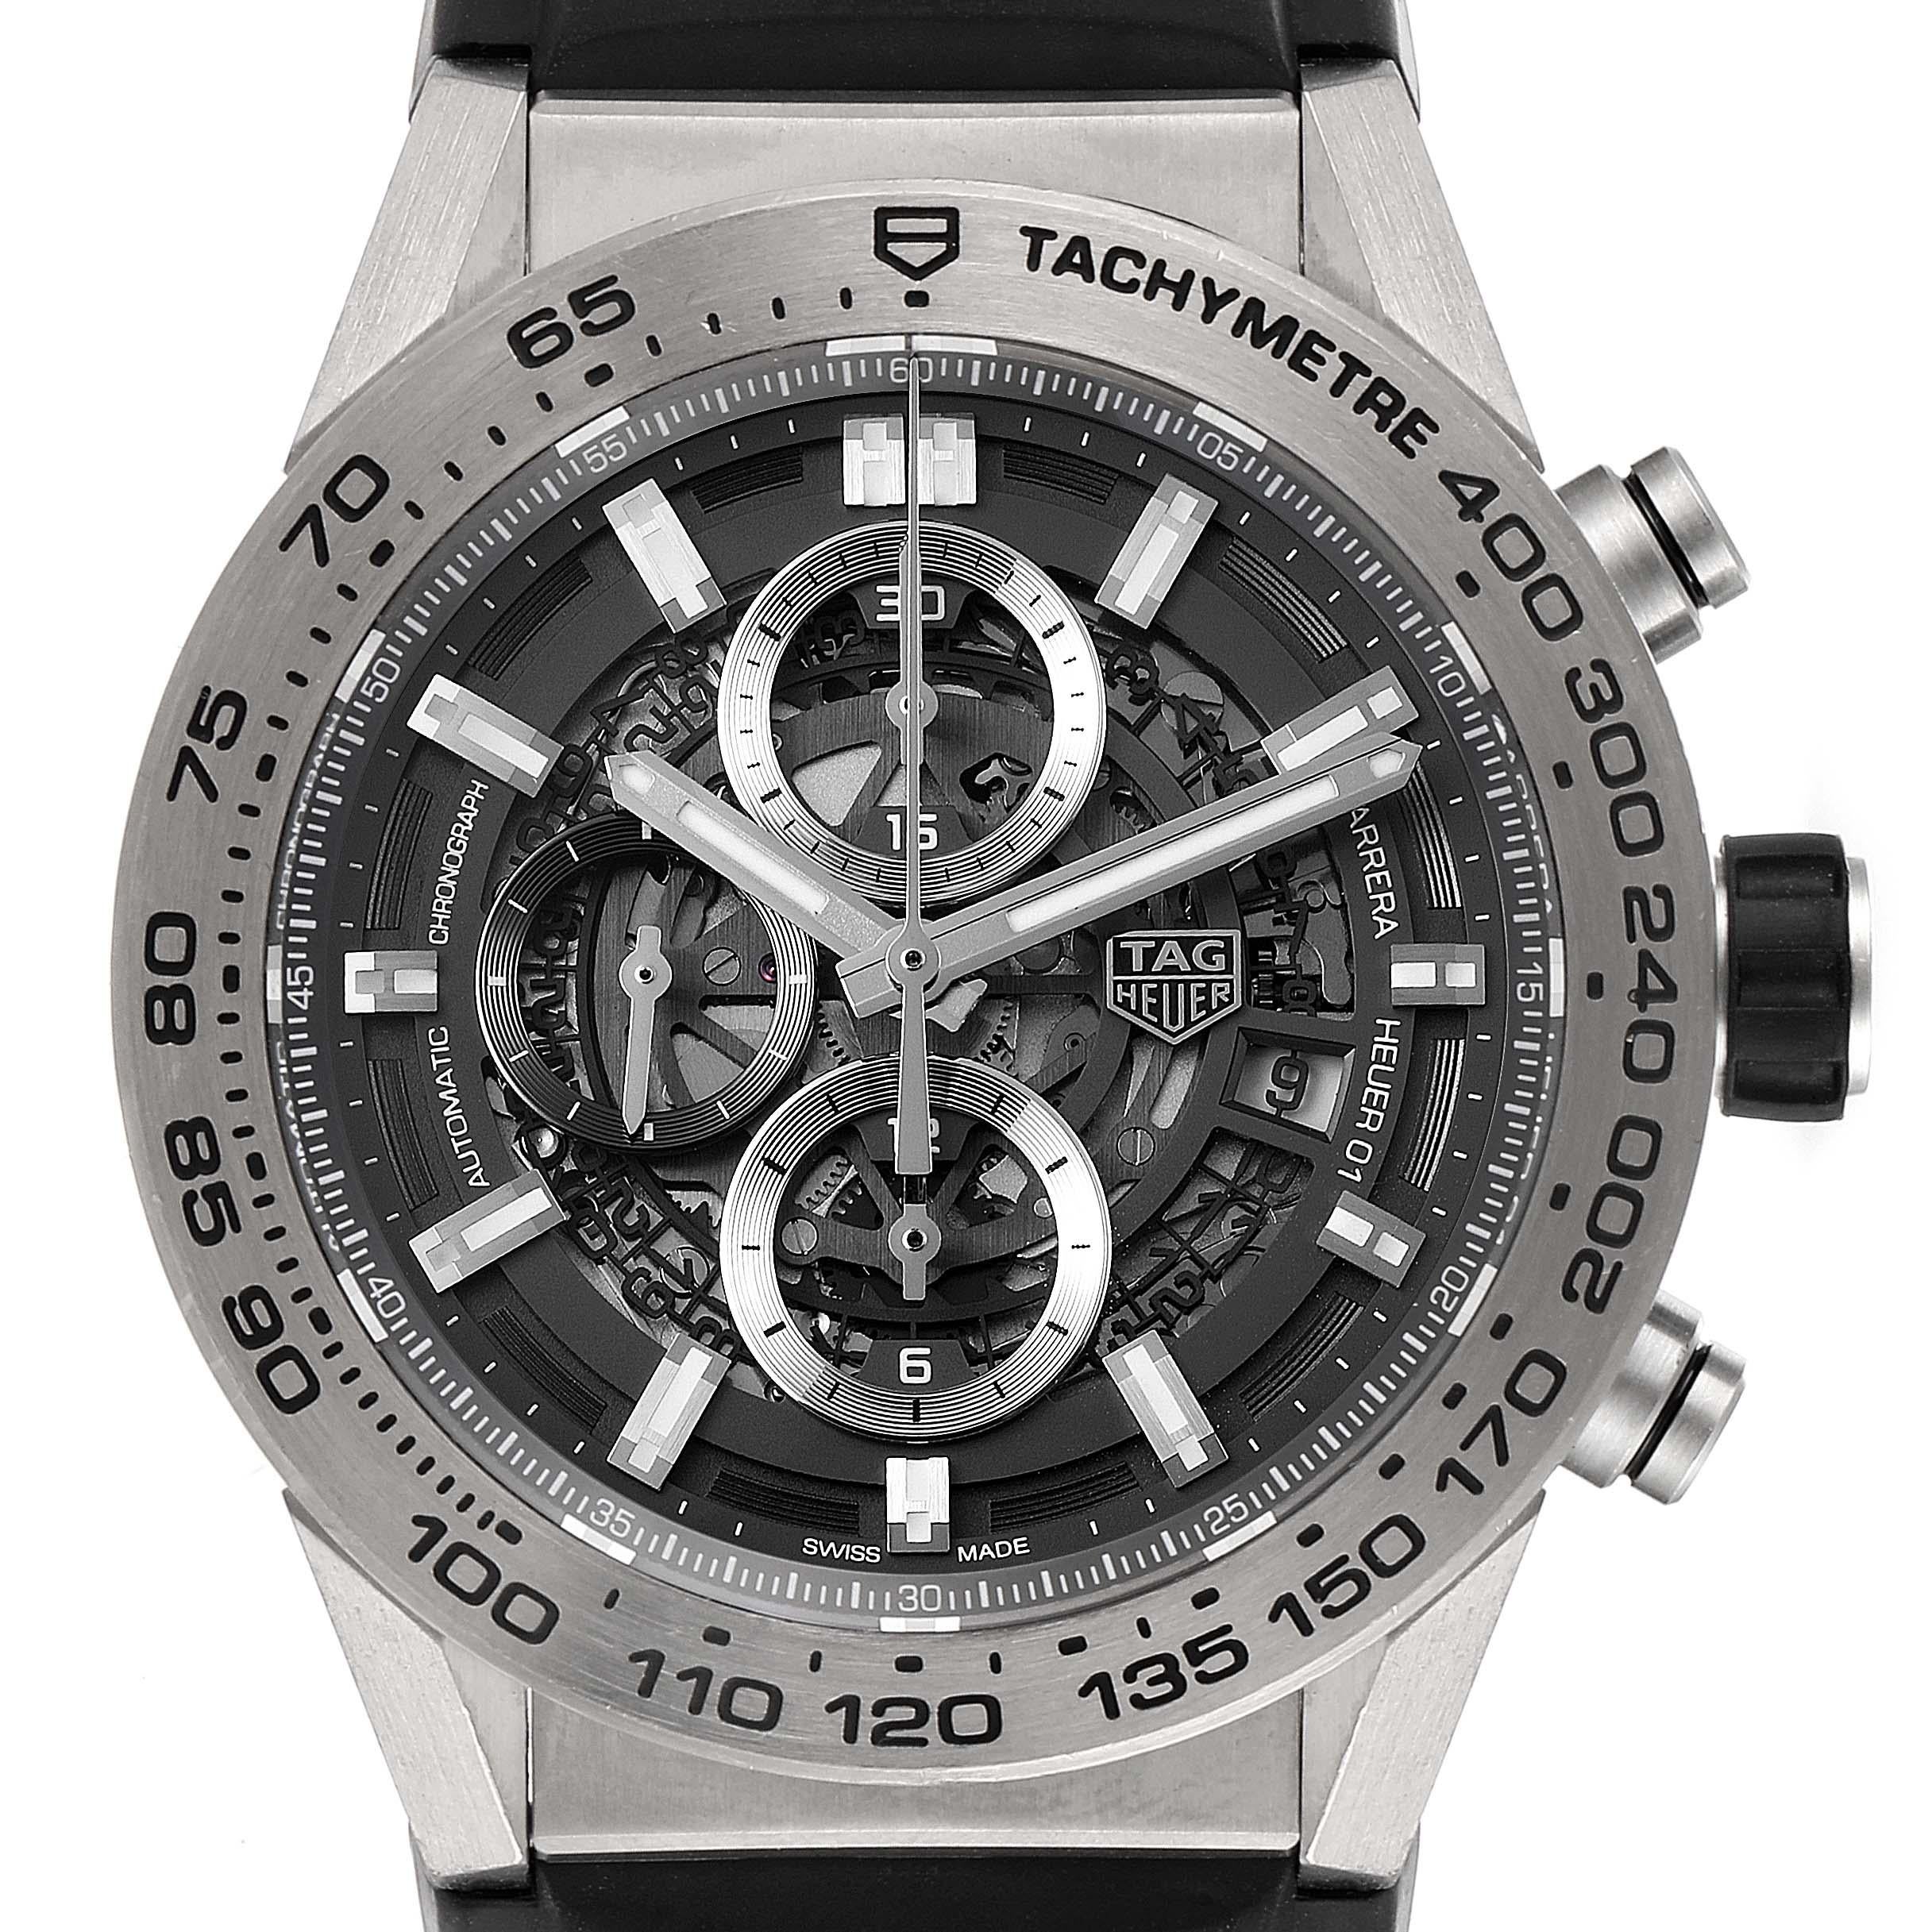 TAG Heuer Carrera Calibre Heuer 01 Skeleton Mens Watch CAR2A8A Box Card. Automatic self-winding movement. Titanium case 45 mm. Case thickness: 16.5 mm. Exhibition sapphire crystal caseback. Steel and rubber fluted crown. Titanium bezel with black